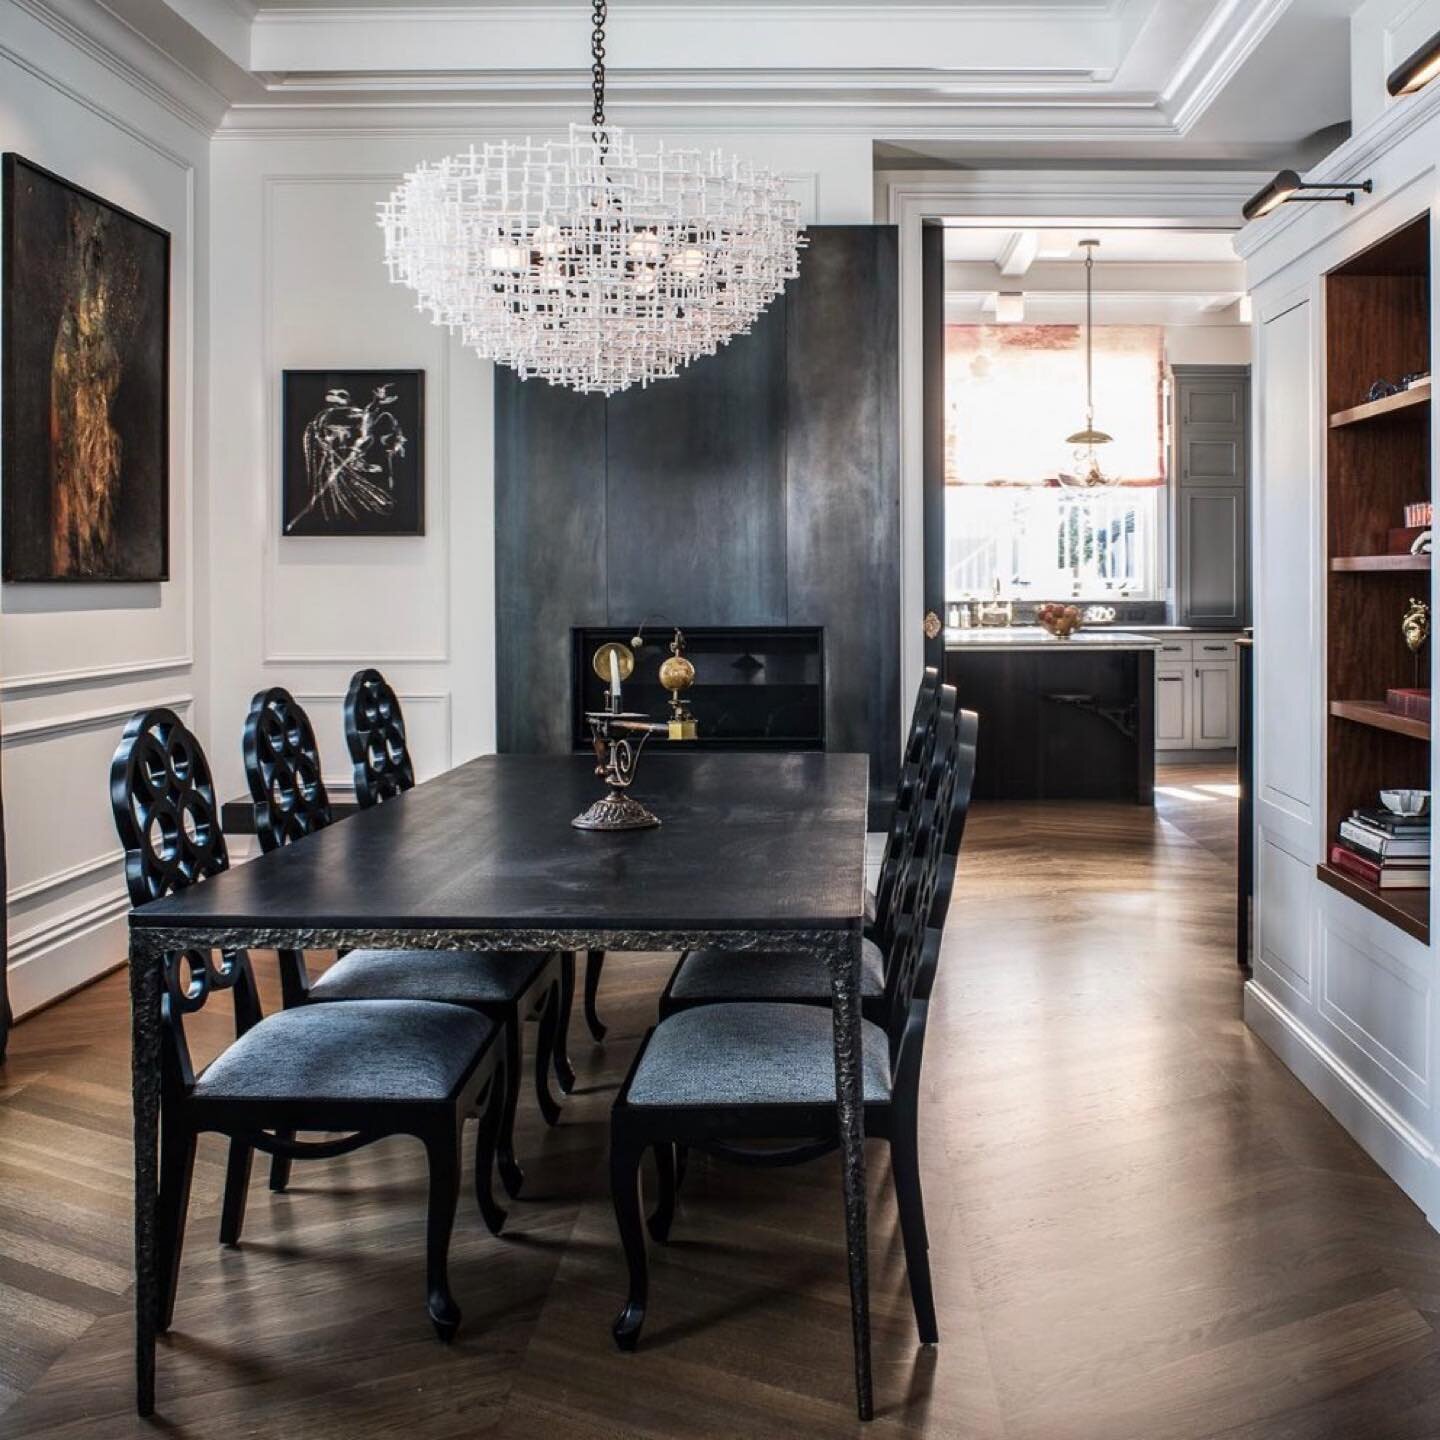 Recently reminded of this wonderful project with some of the best people #flashbackfriday #fbf #spacesmagazine #bayareaarchitect #victorianhouse #diningroominspo #beautiful #livebeautifully #architecture
#residentialdesign #remodel
#norcalarchitectur